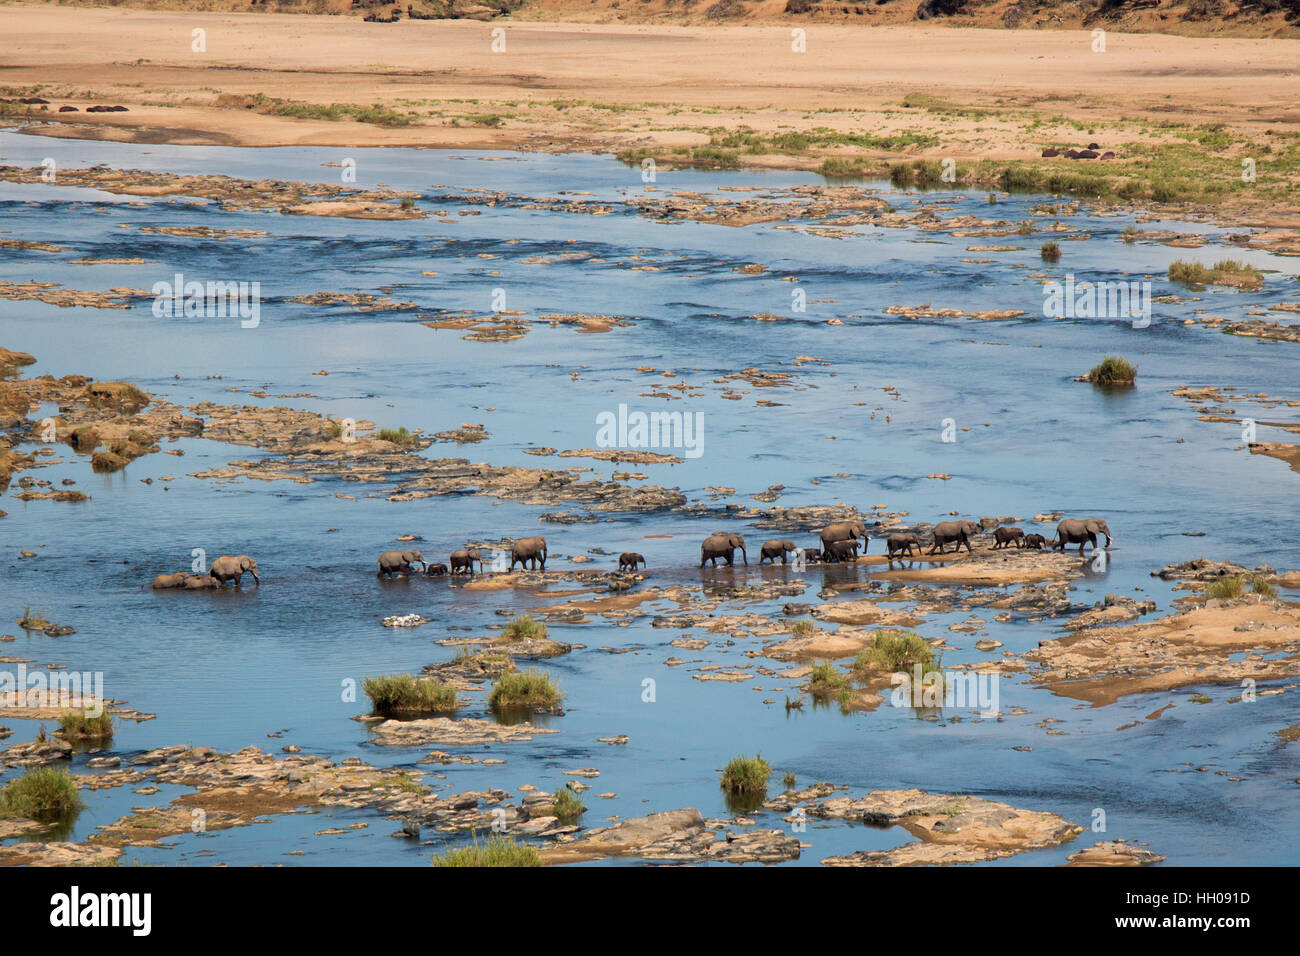 A herd of elephants crossing the Olifants River in the Kruger National Park, Mpumalanga, South Africa. Stock Photo